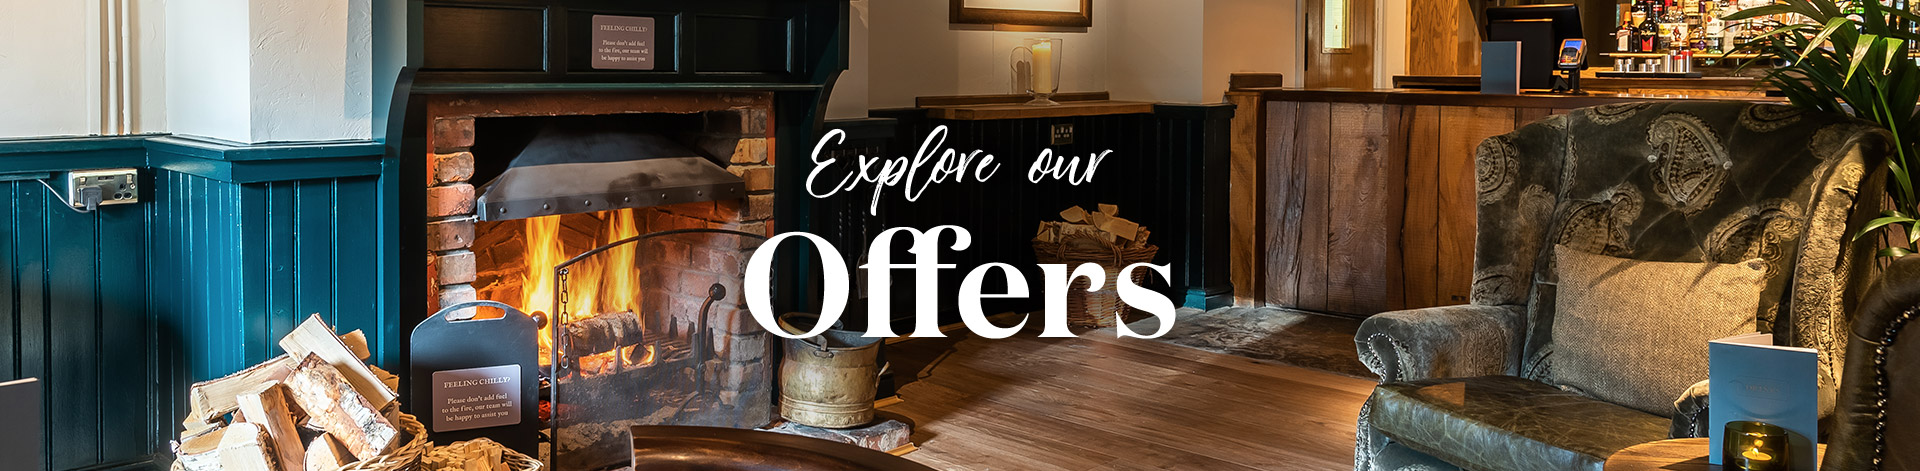 Our latest offers at The King's Head, North Weald